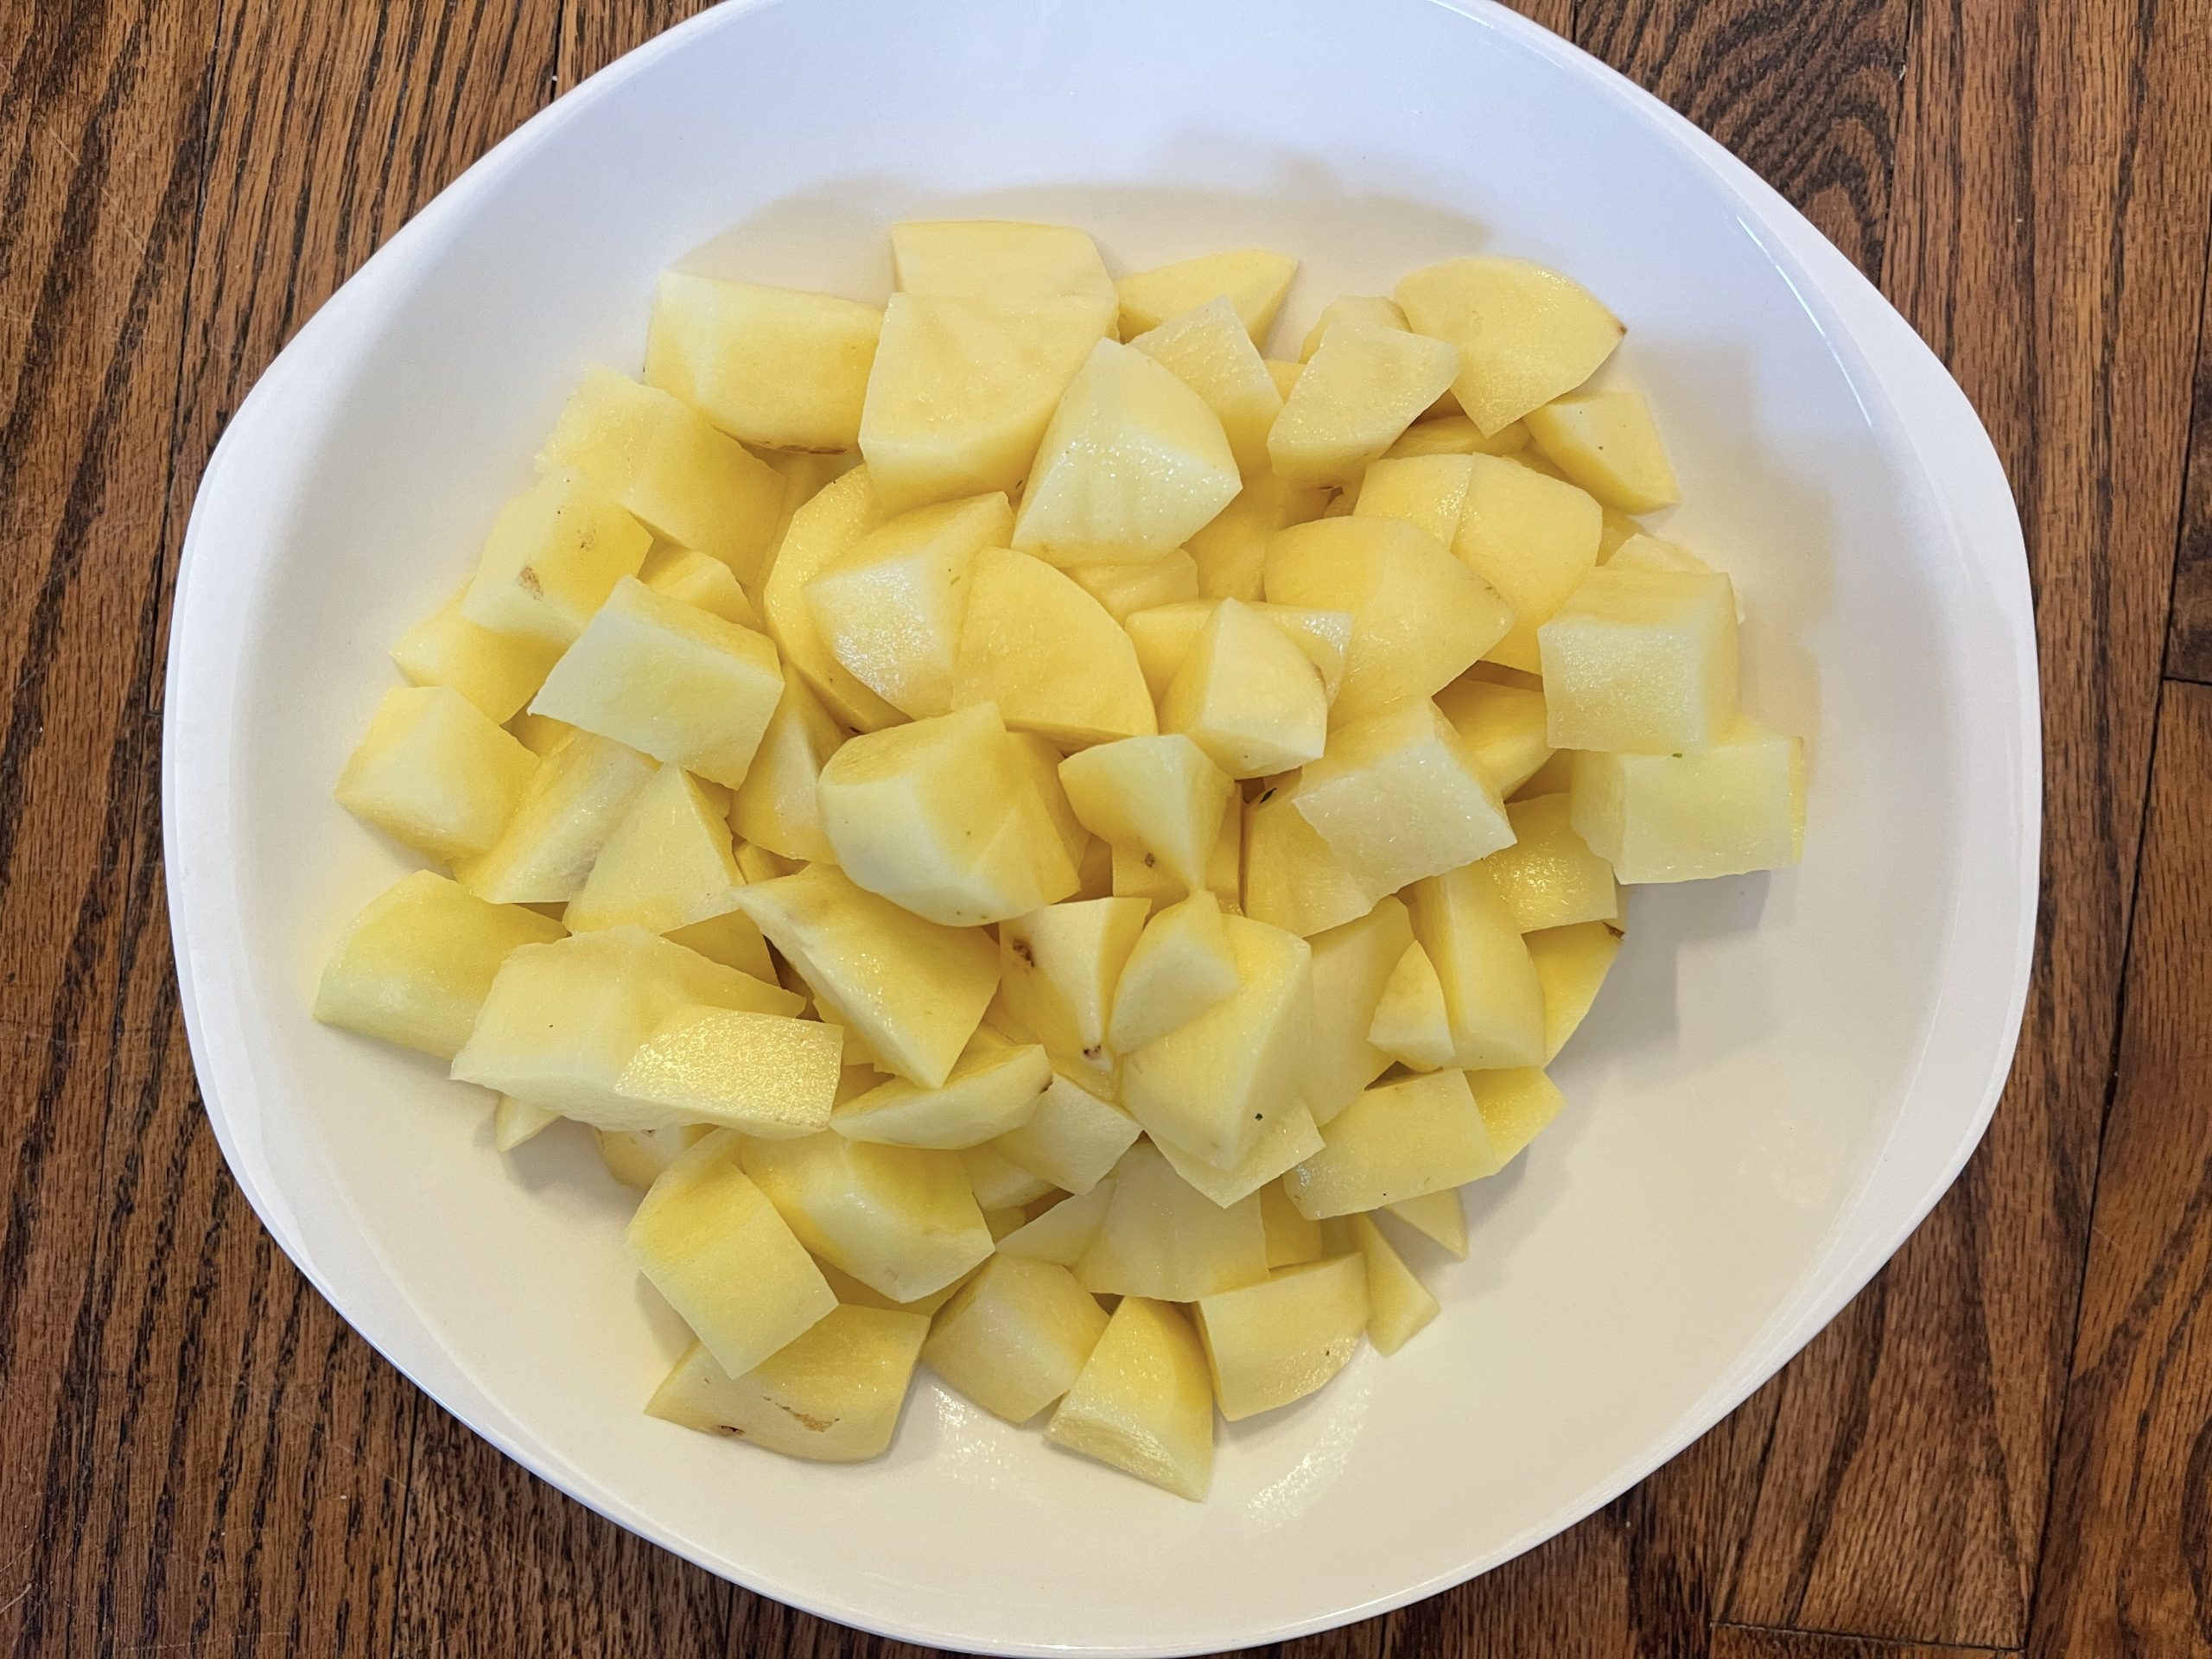 peel and dice potatoes into 1 1/2-2" pieces